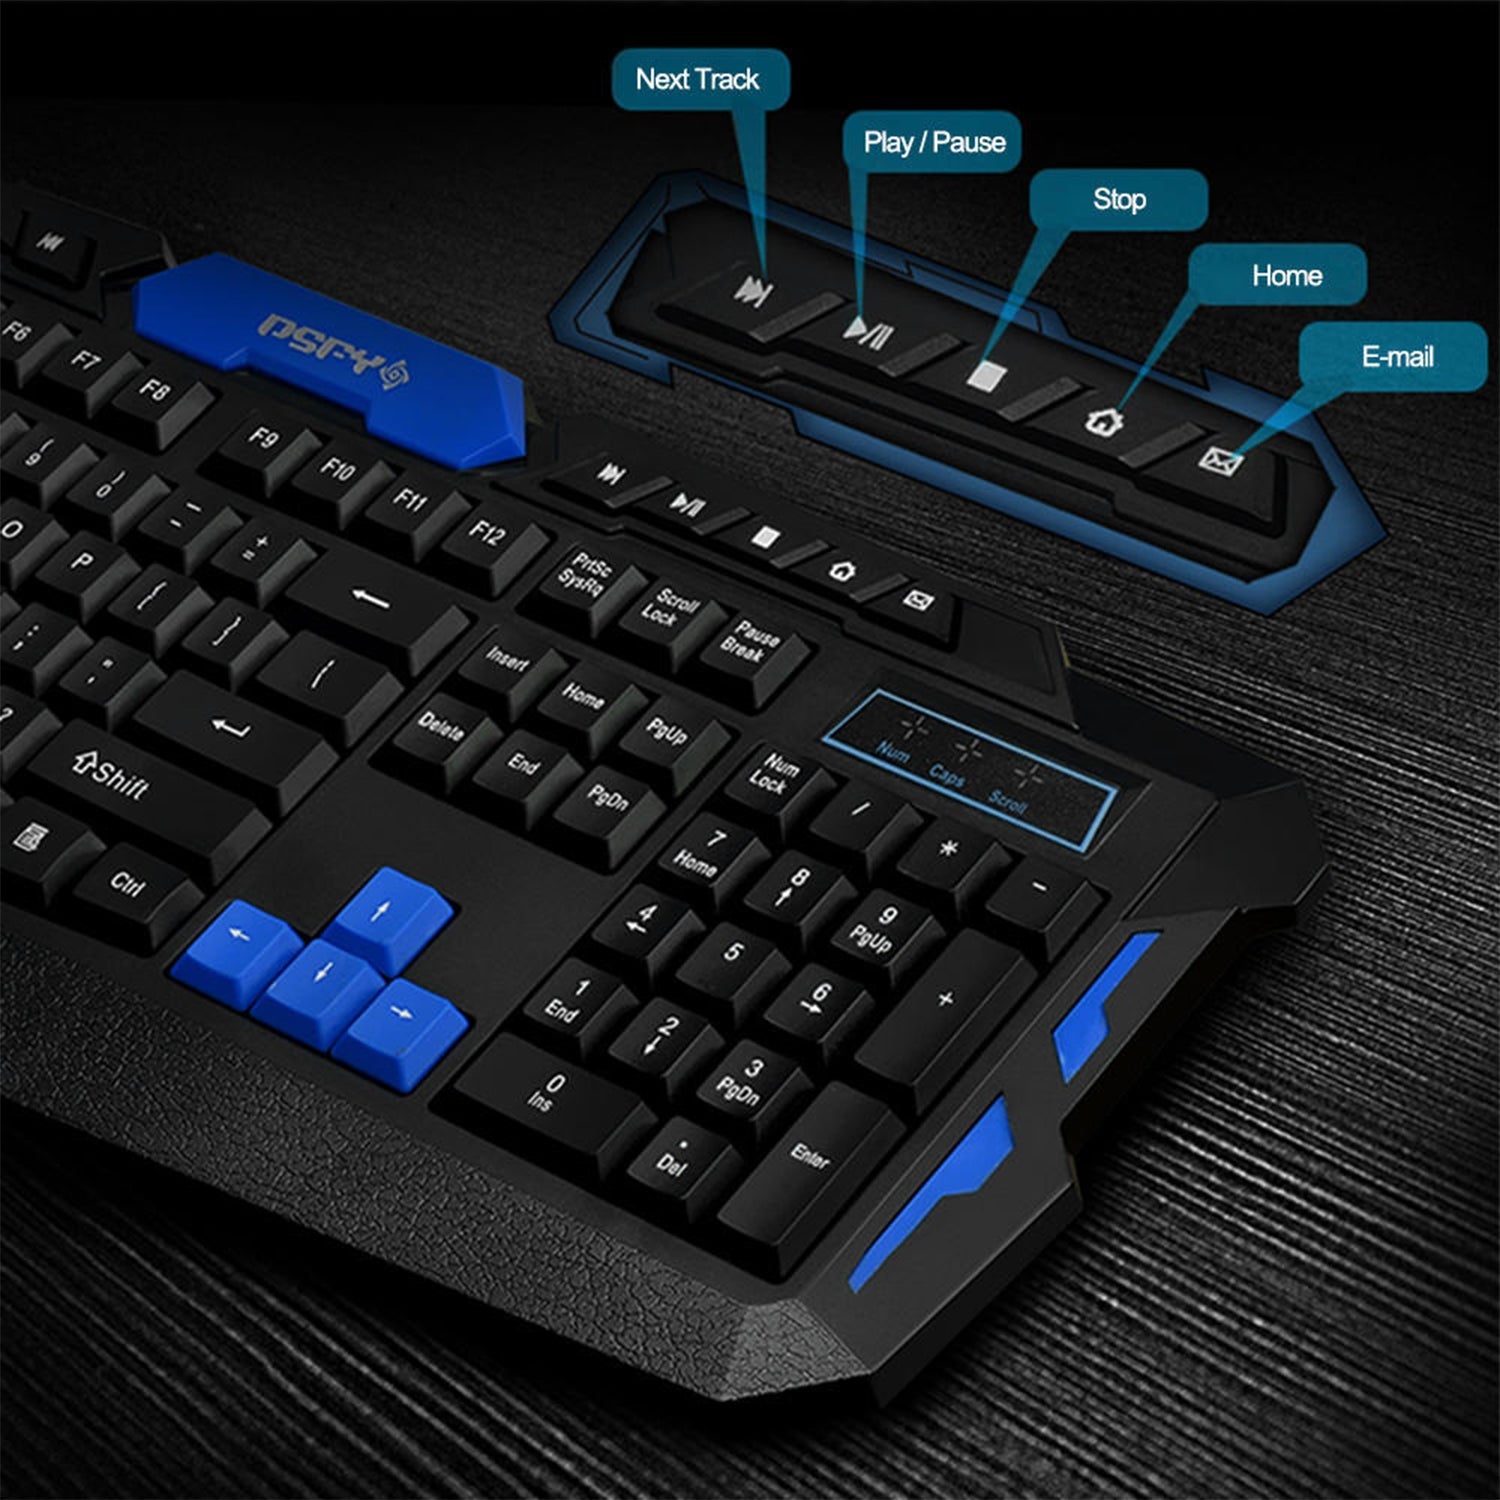 6158 Wireless Keyboard M Set used by gamers for playing heavy games perfectly without any problem and all.